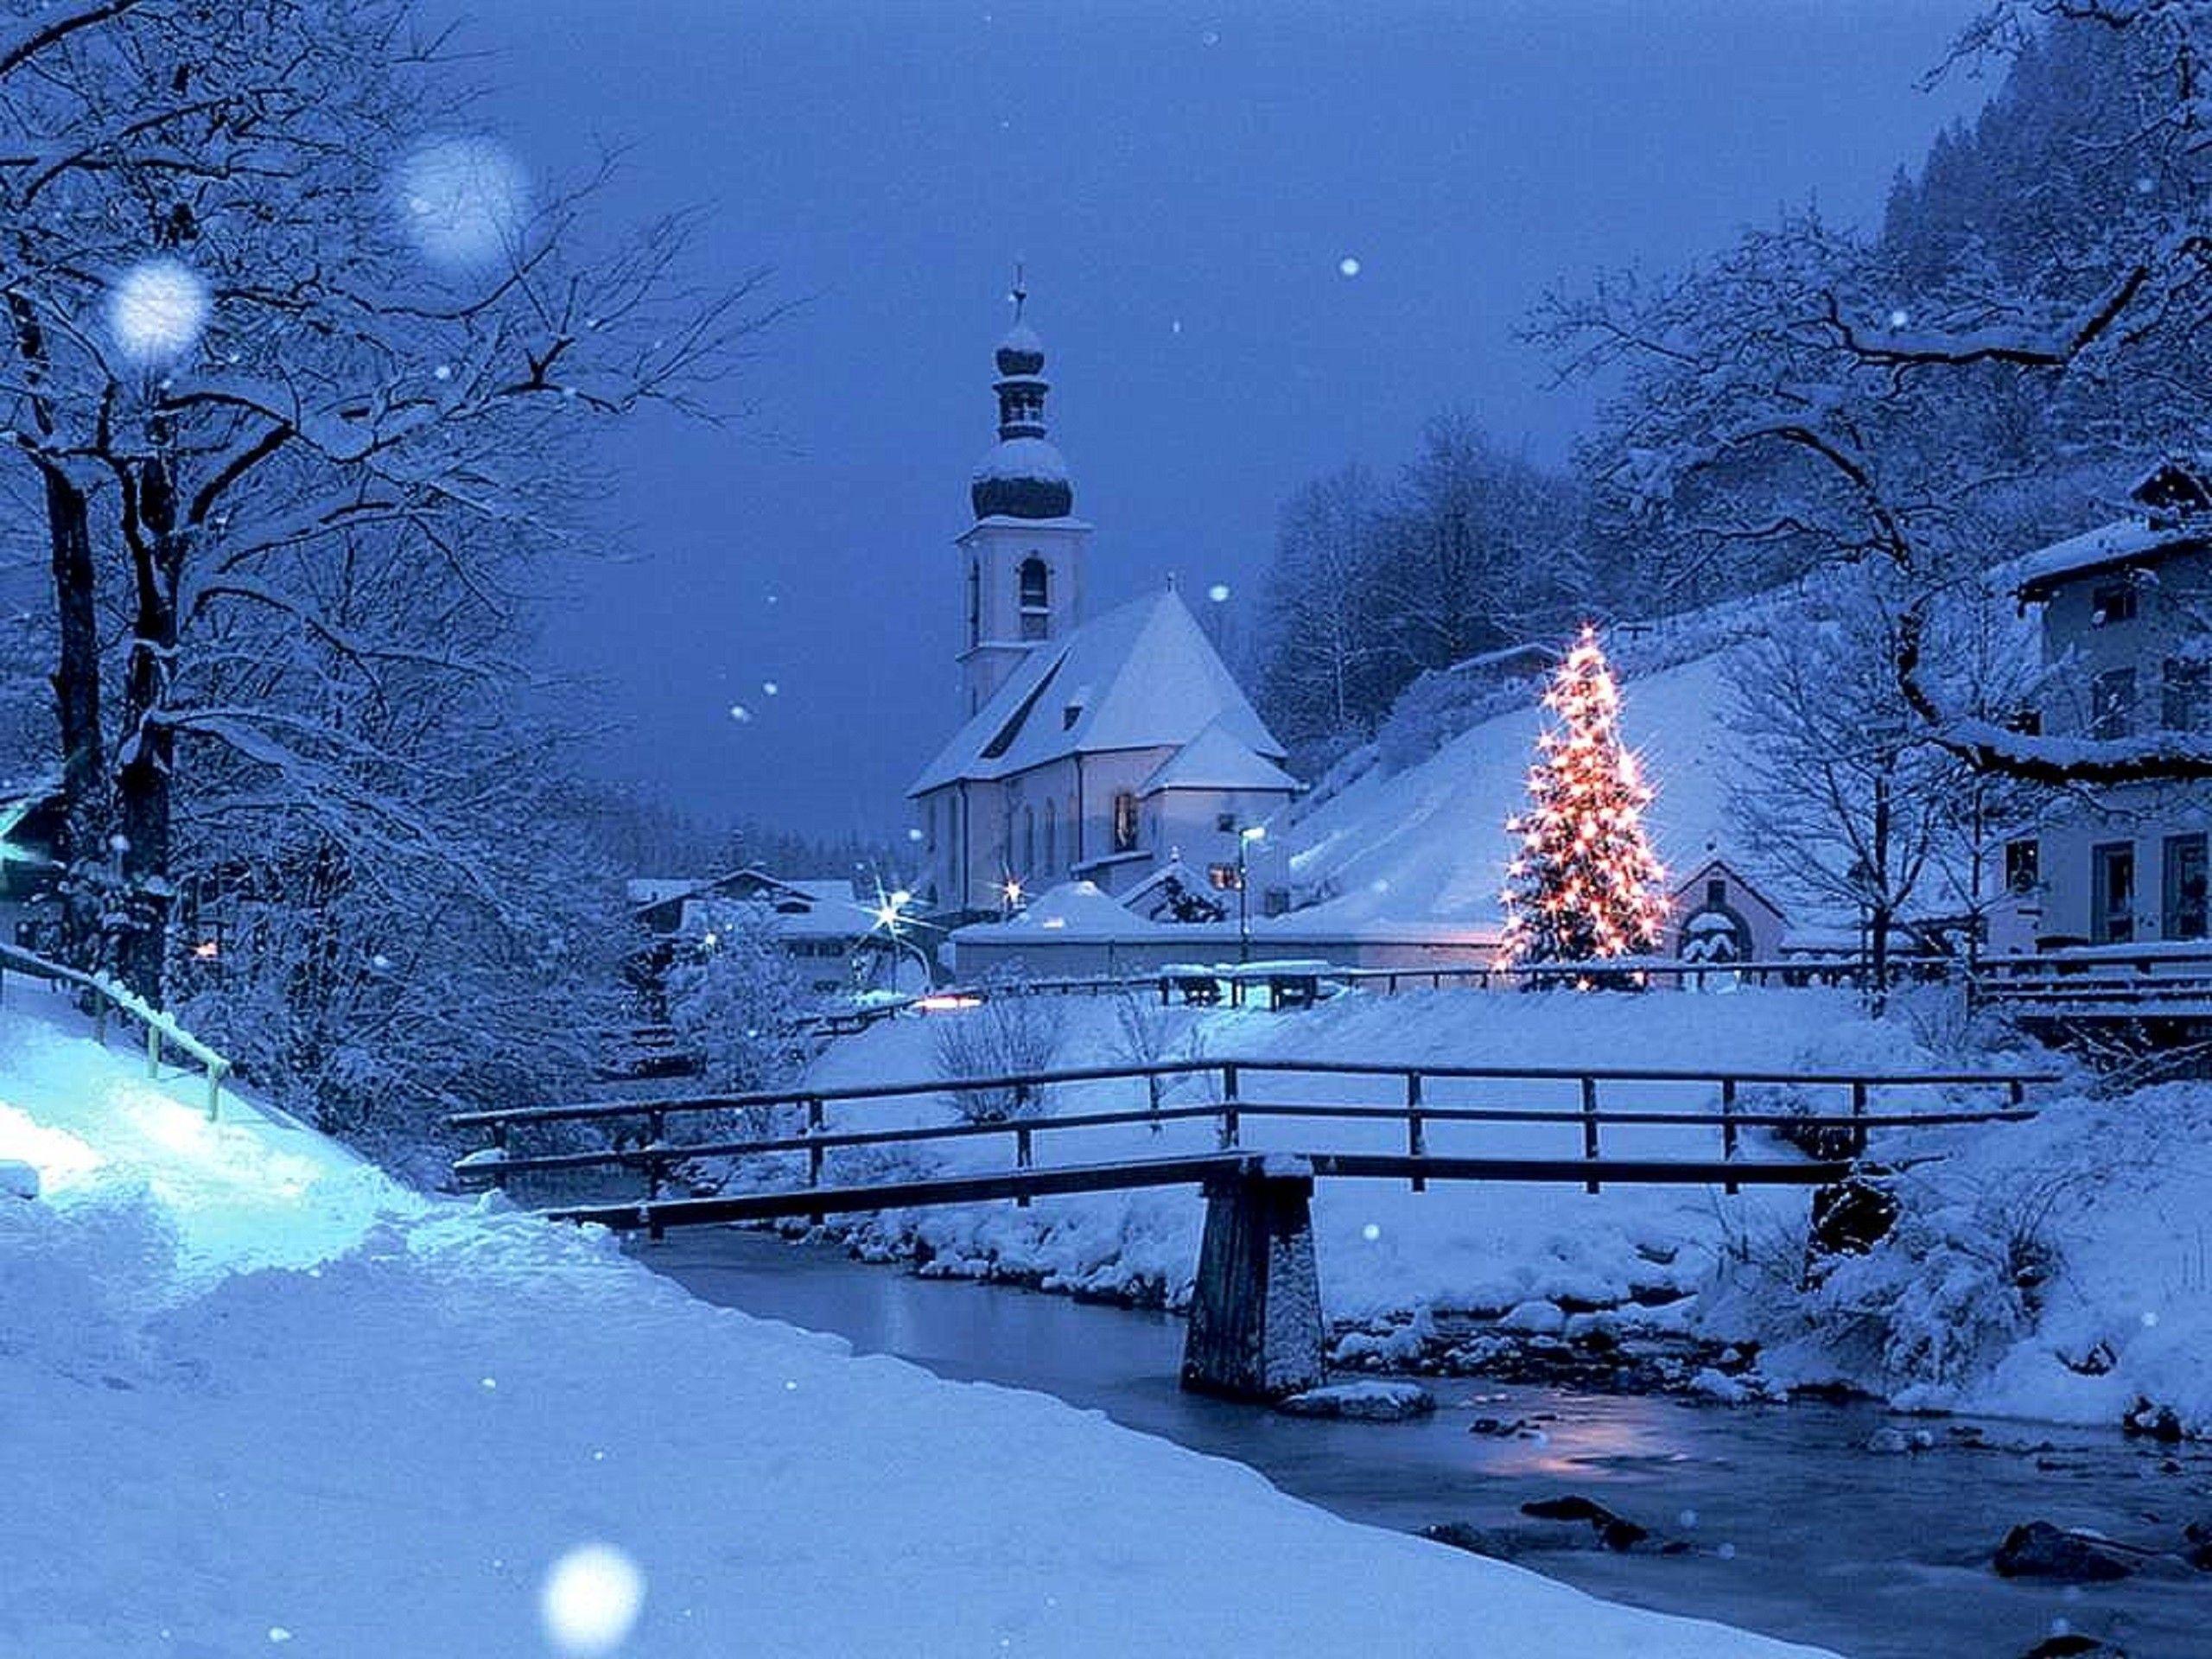 Winter Village Wallpapers Top Free Winter Village Backgrounds